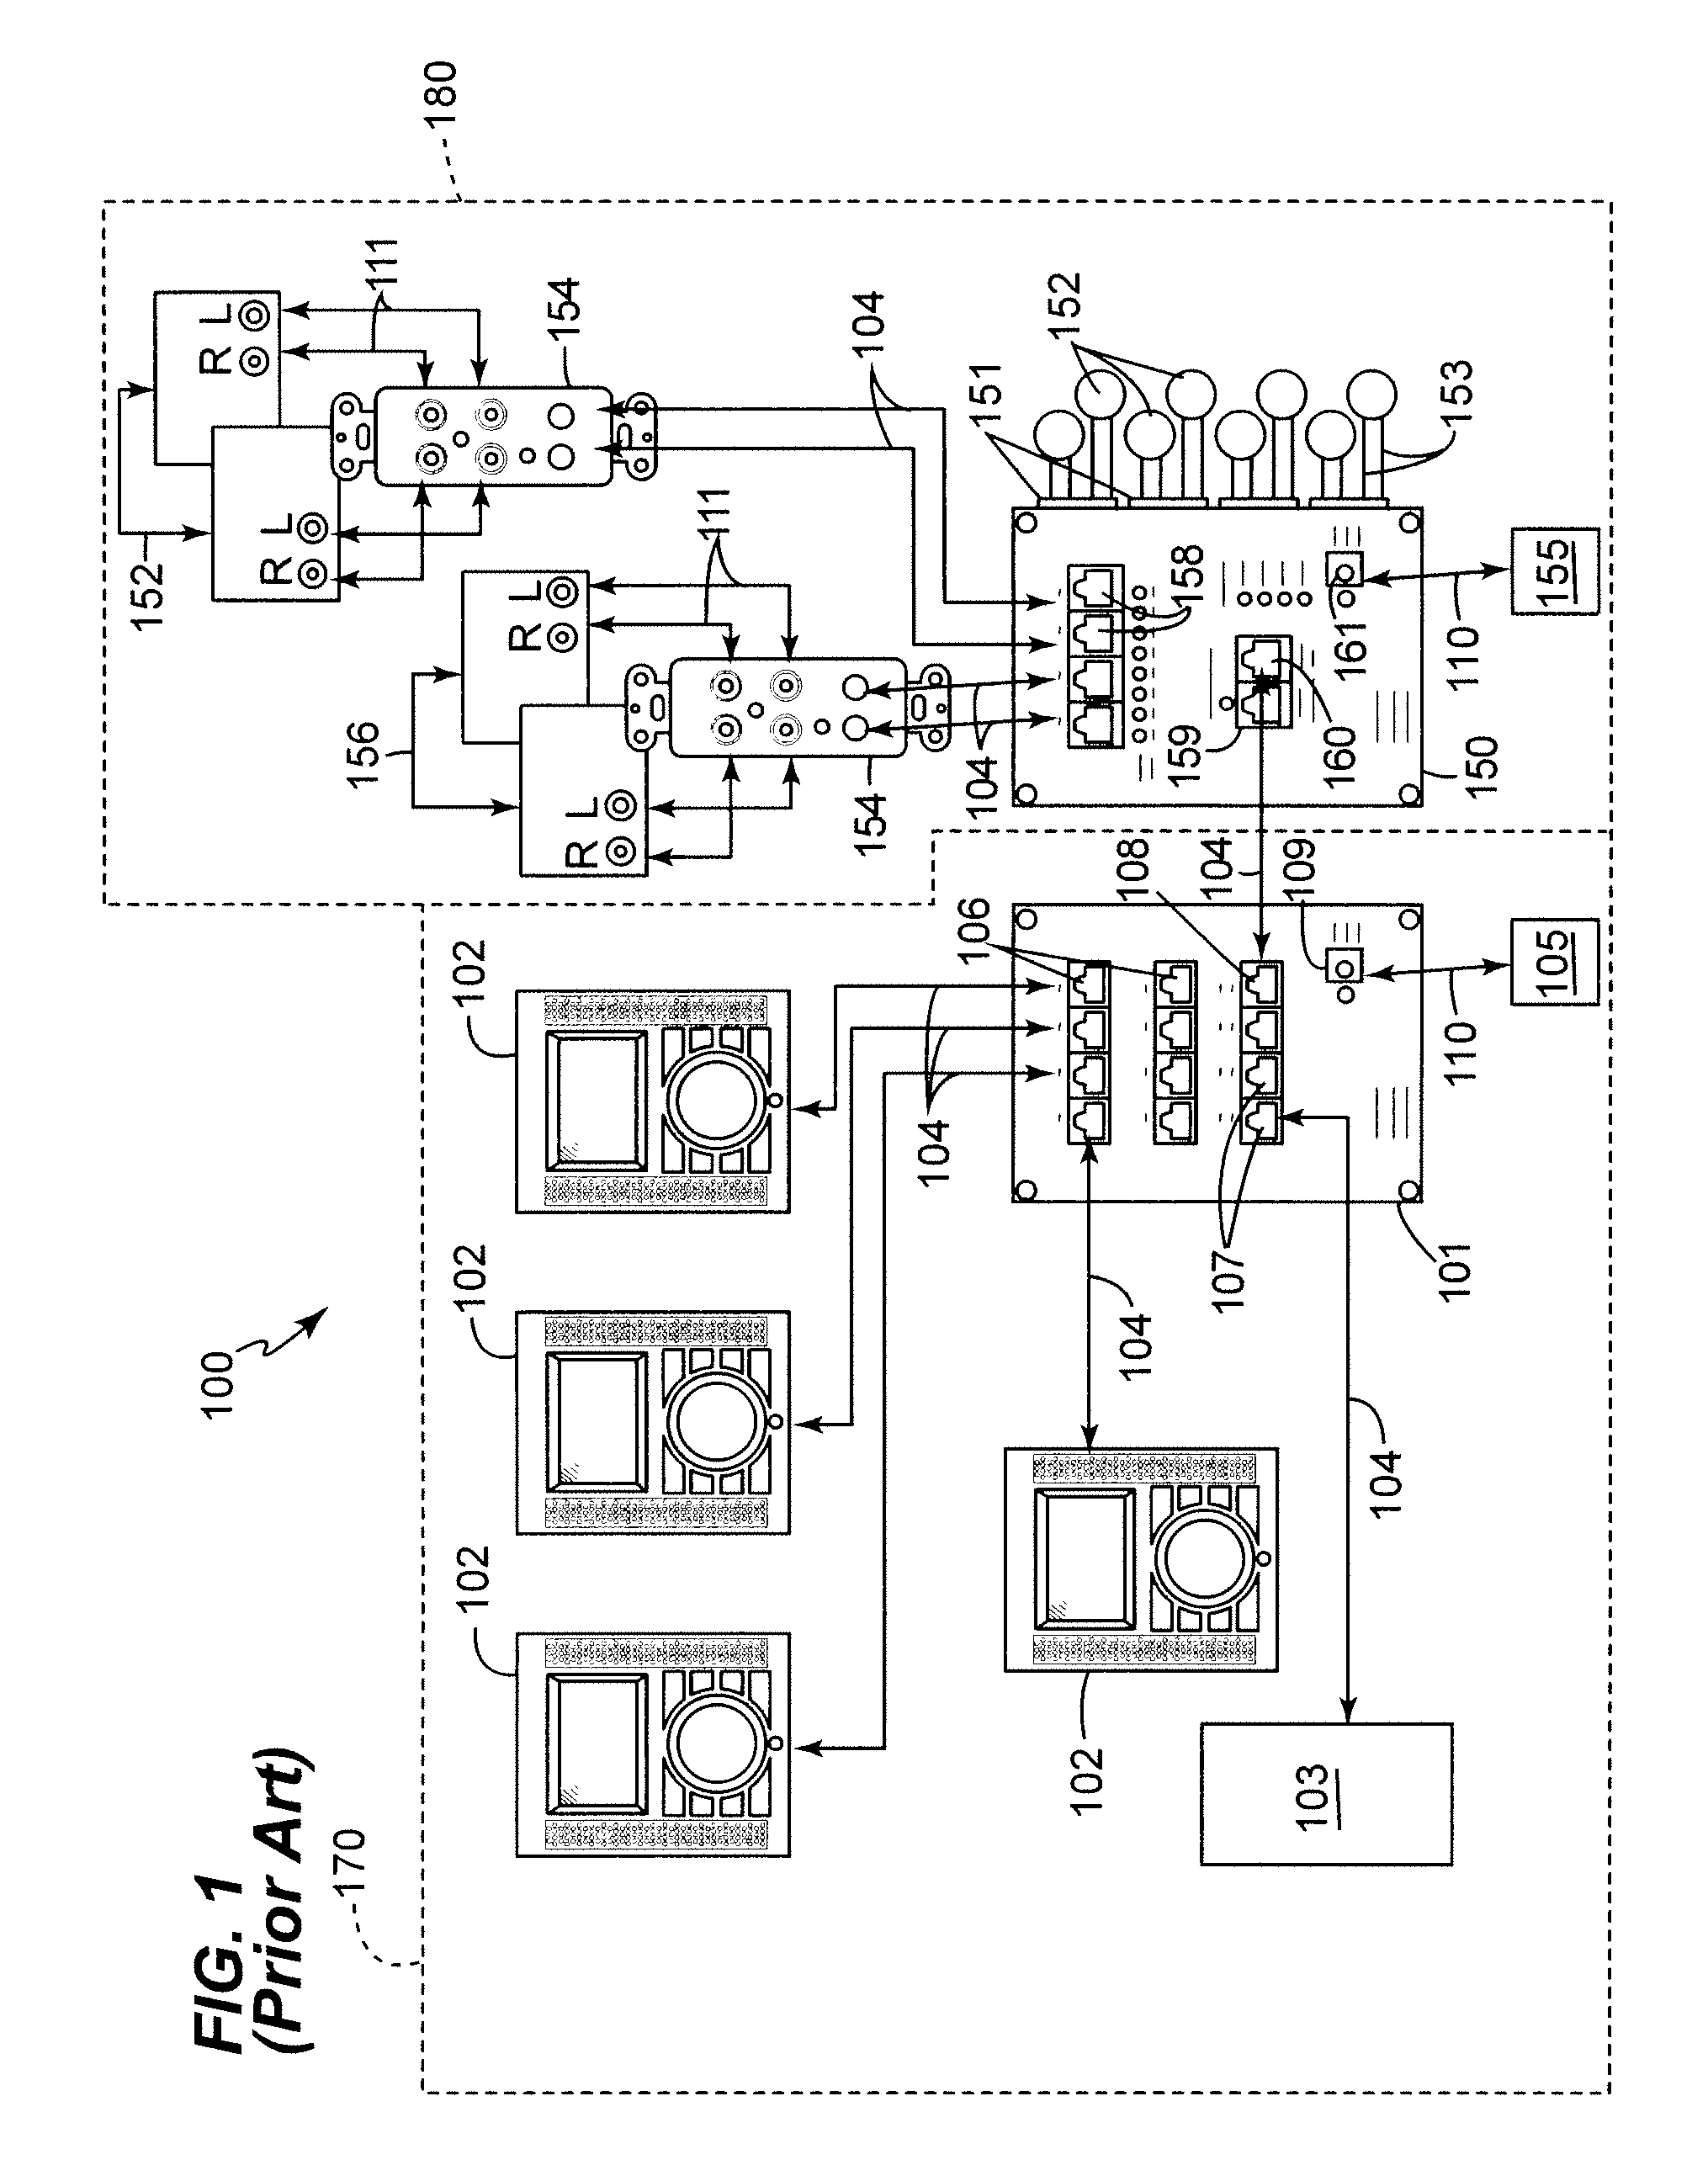 System and method for integrated intercom and distributed audio/video system with security interface